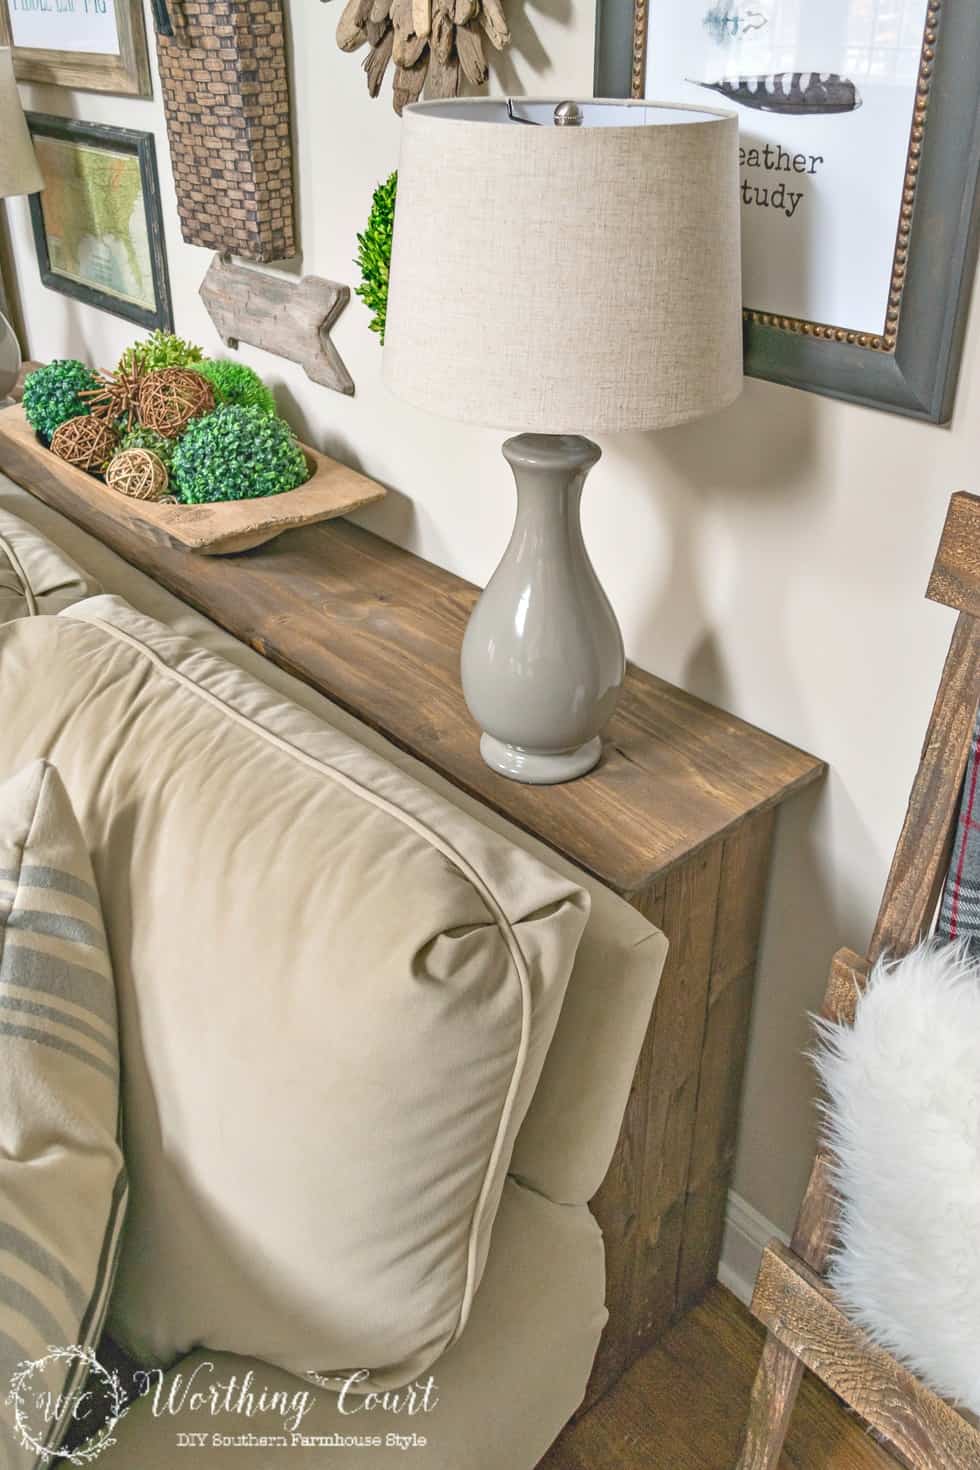 How To Build A Rustic Sofa Table - Worthing Court | DIY Home Decor Easy